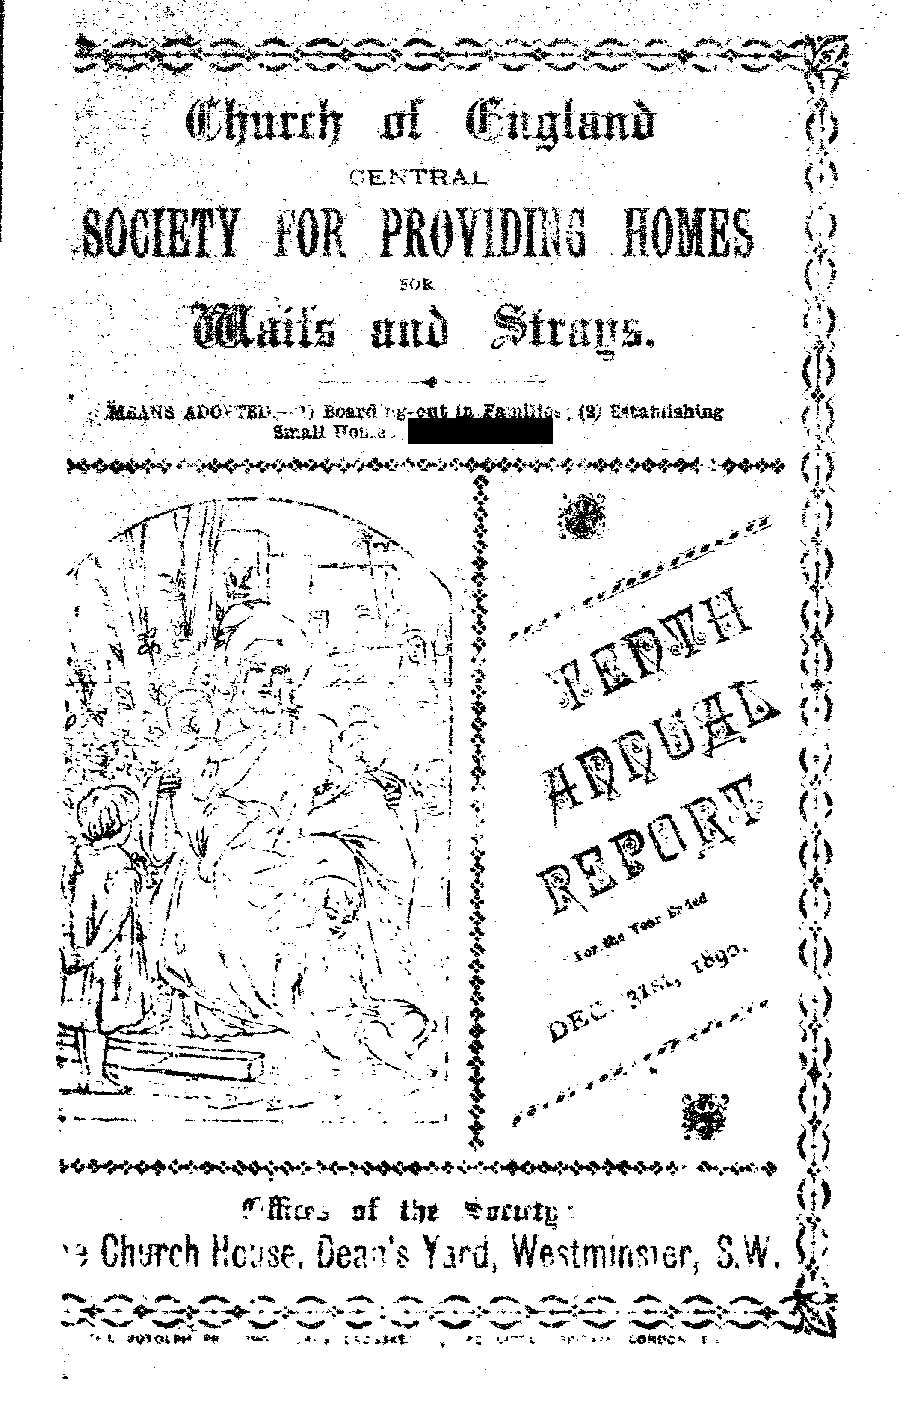 Annual Report 1890 - page 1